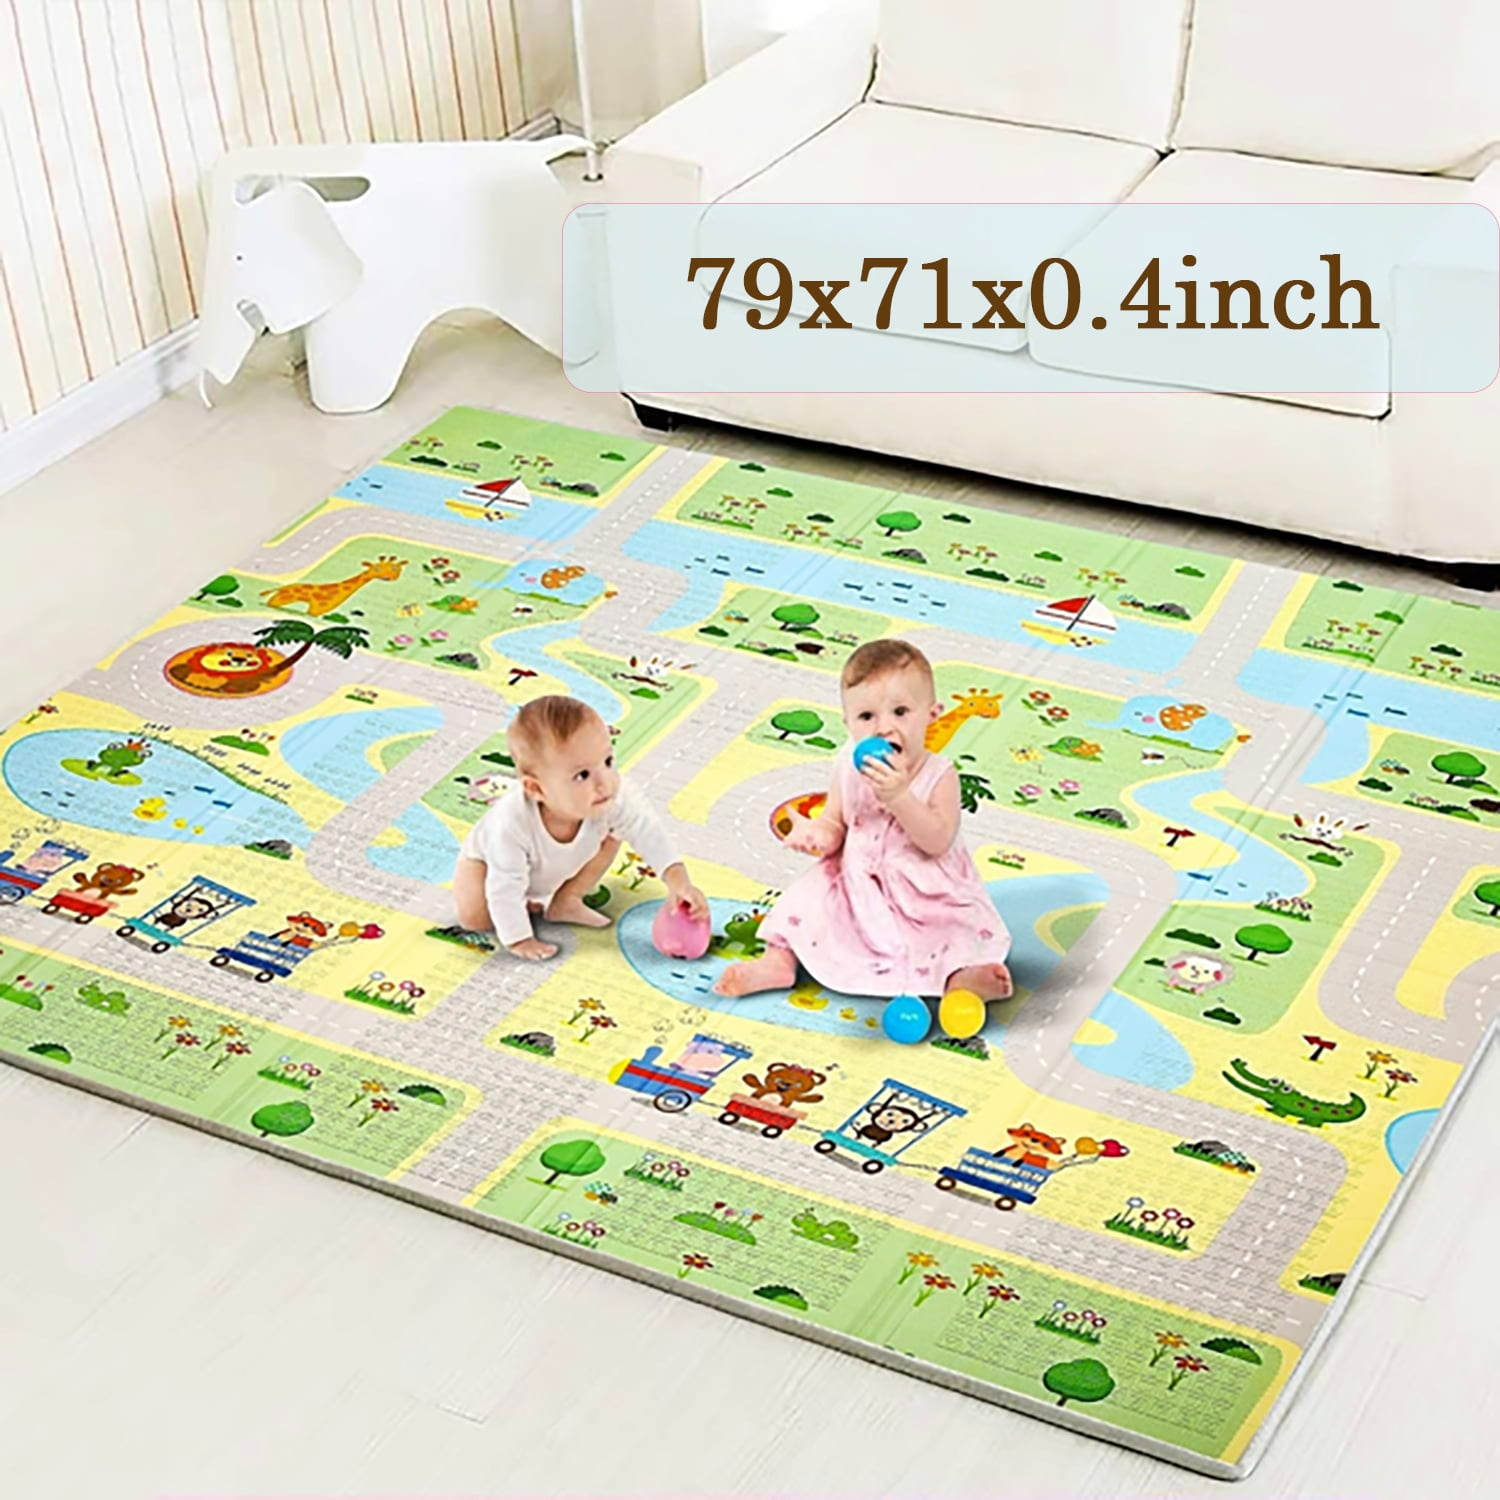 Play Mat for Baby Toddler Gym Activity Puzzle Exercise Foam Tiles Pads Kids Learning Carpets Floor Crawling Rug Double Sides Non-Slip Waterproof Portable Playroom Playmat US 